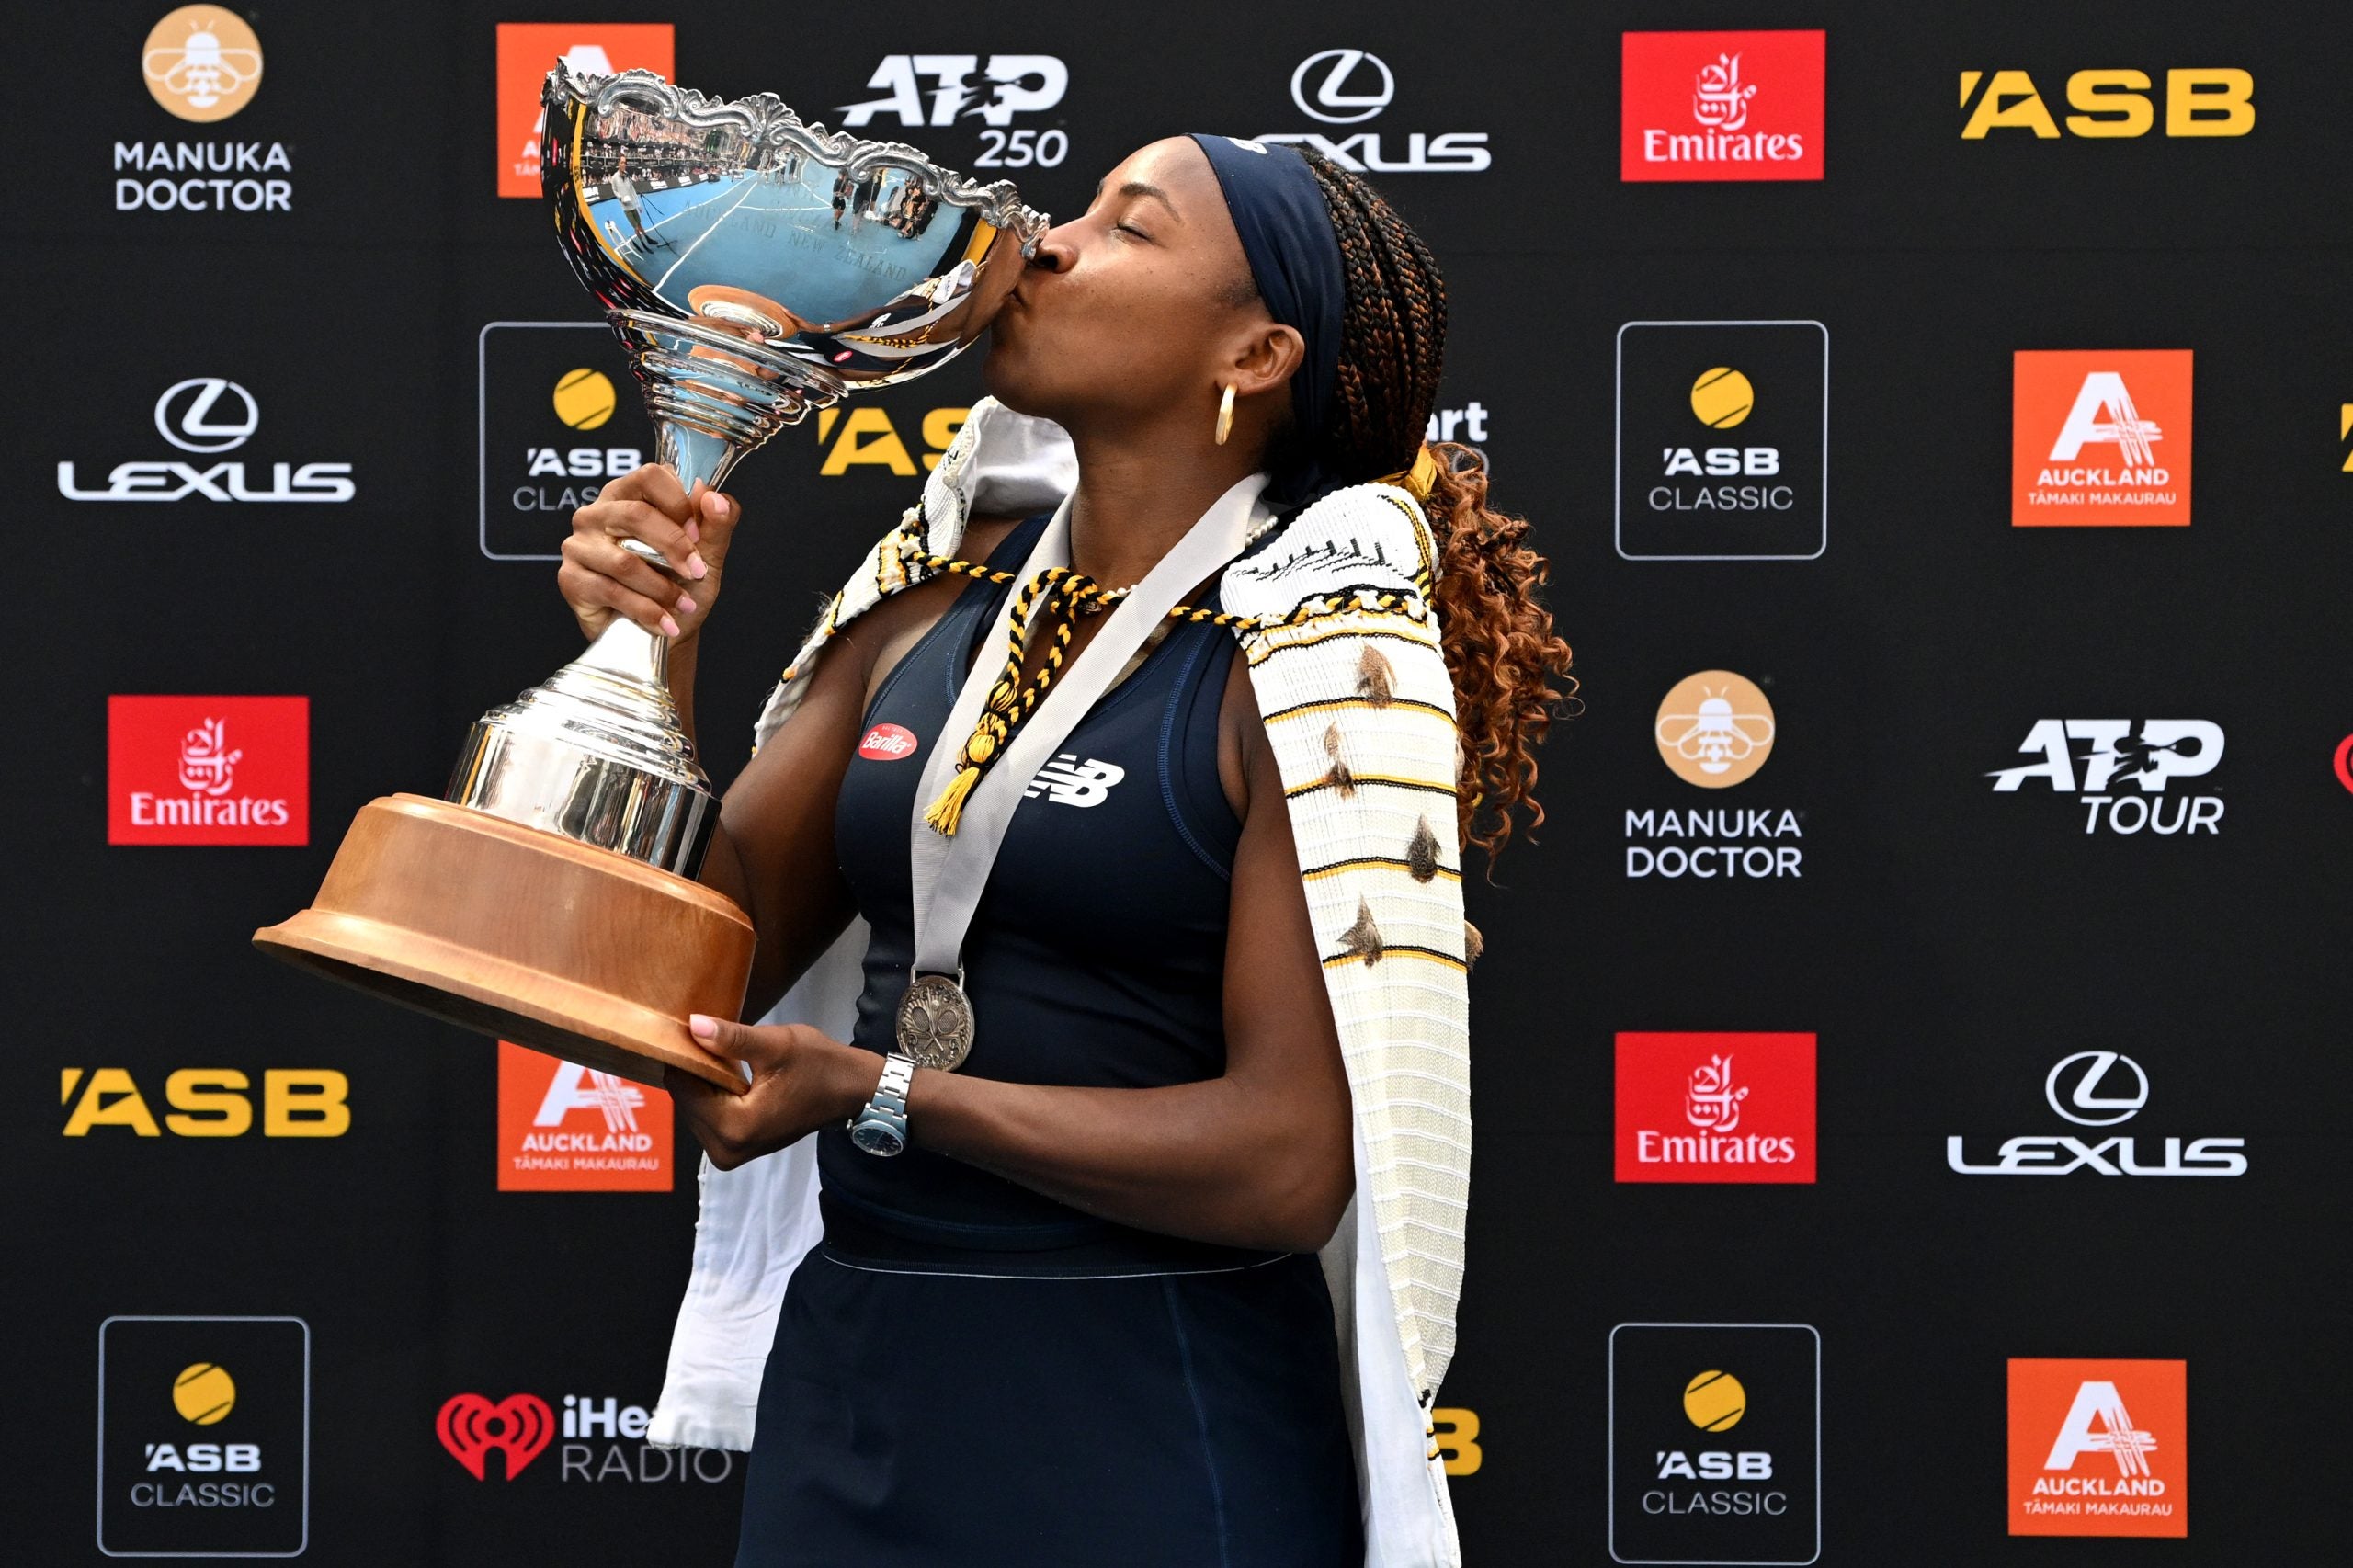 Coco Gauff Successfully Defends Her Title, Wins The ASB Classic